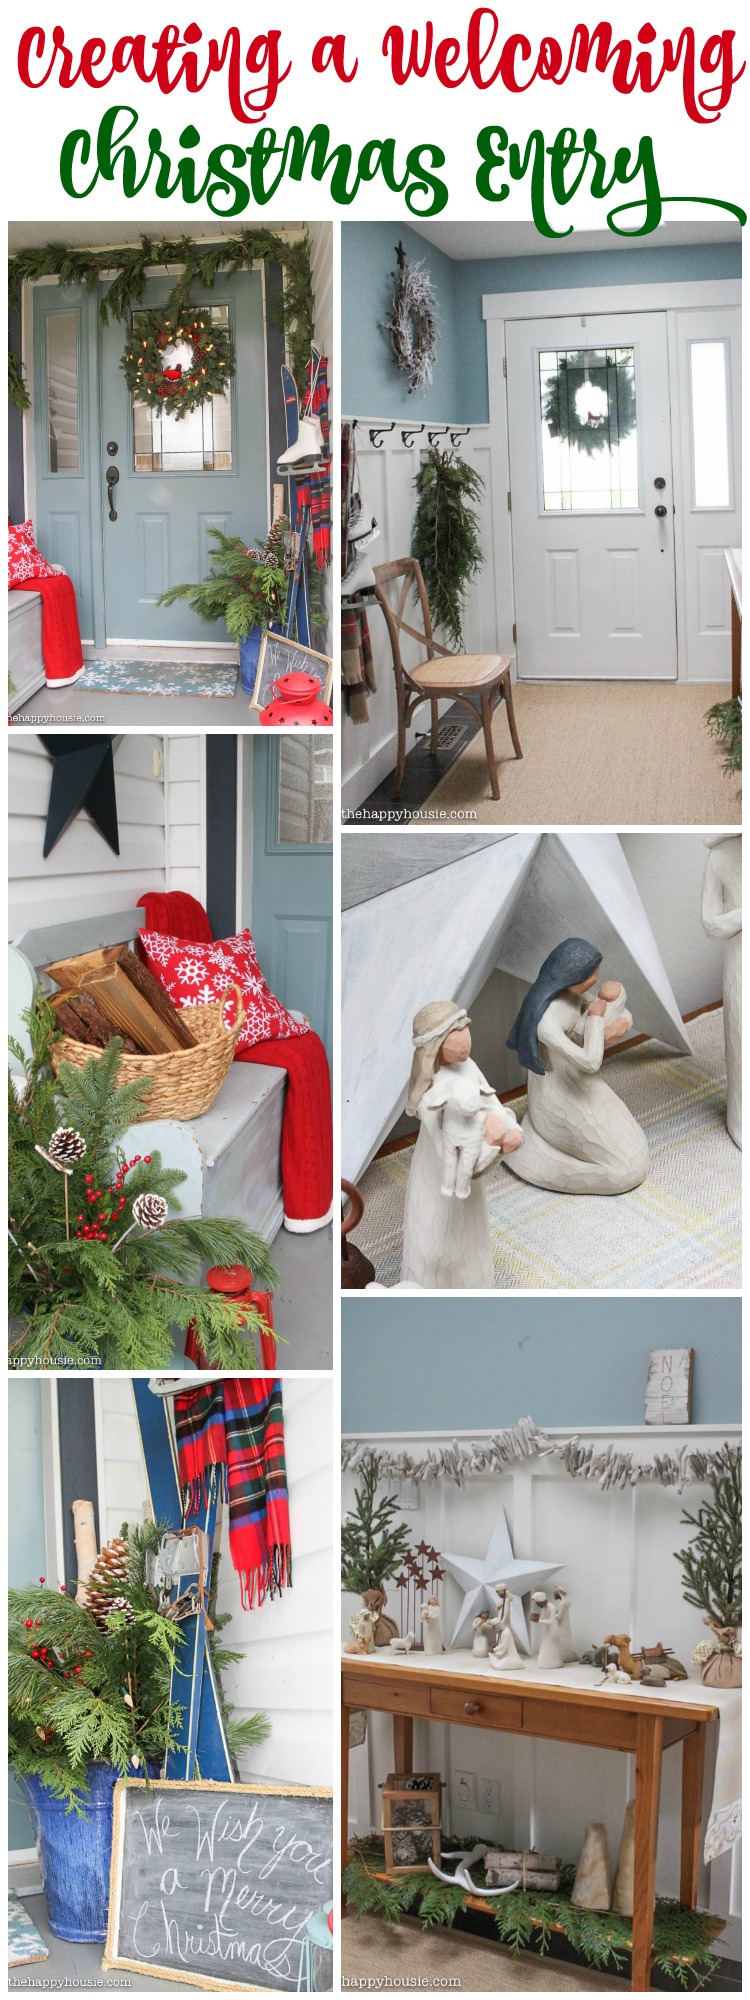 Creating a Welcoming Christmas Entry - A Very Merry Christmas Home Tour of our Front Porch and Entry Hall at thehappyhousie.com